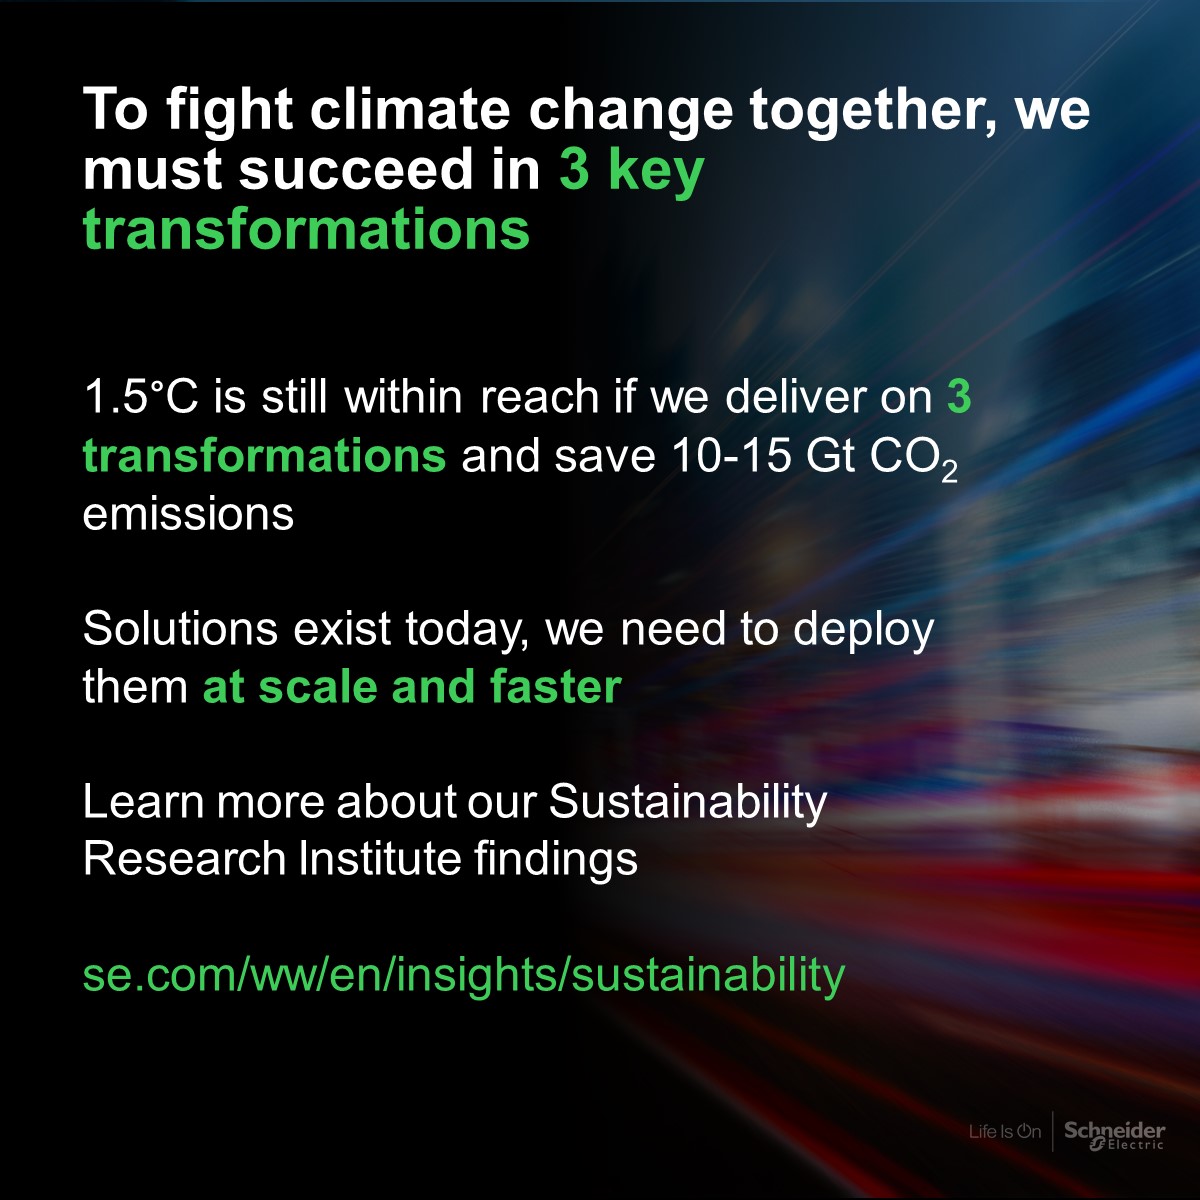 Time to tackle the demand side of the energy transition at #ClimateWeekNYC. Our Sustainability Research Institute reinforces our contribution to the #climate and #energy debate this week. Click to discover more: spr.ly/6011MTxJ9

#ClimateWeekNYC #Impactcompany